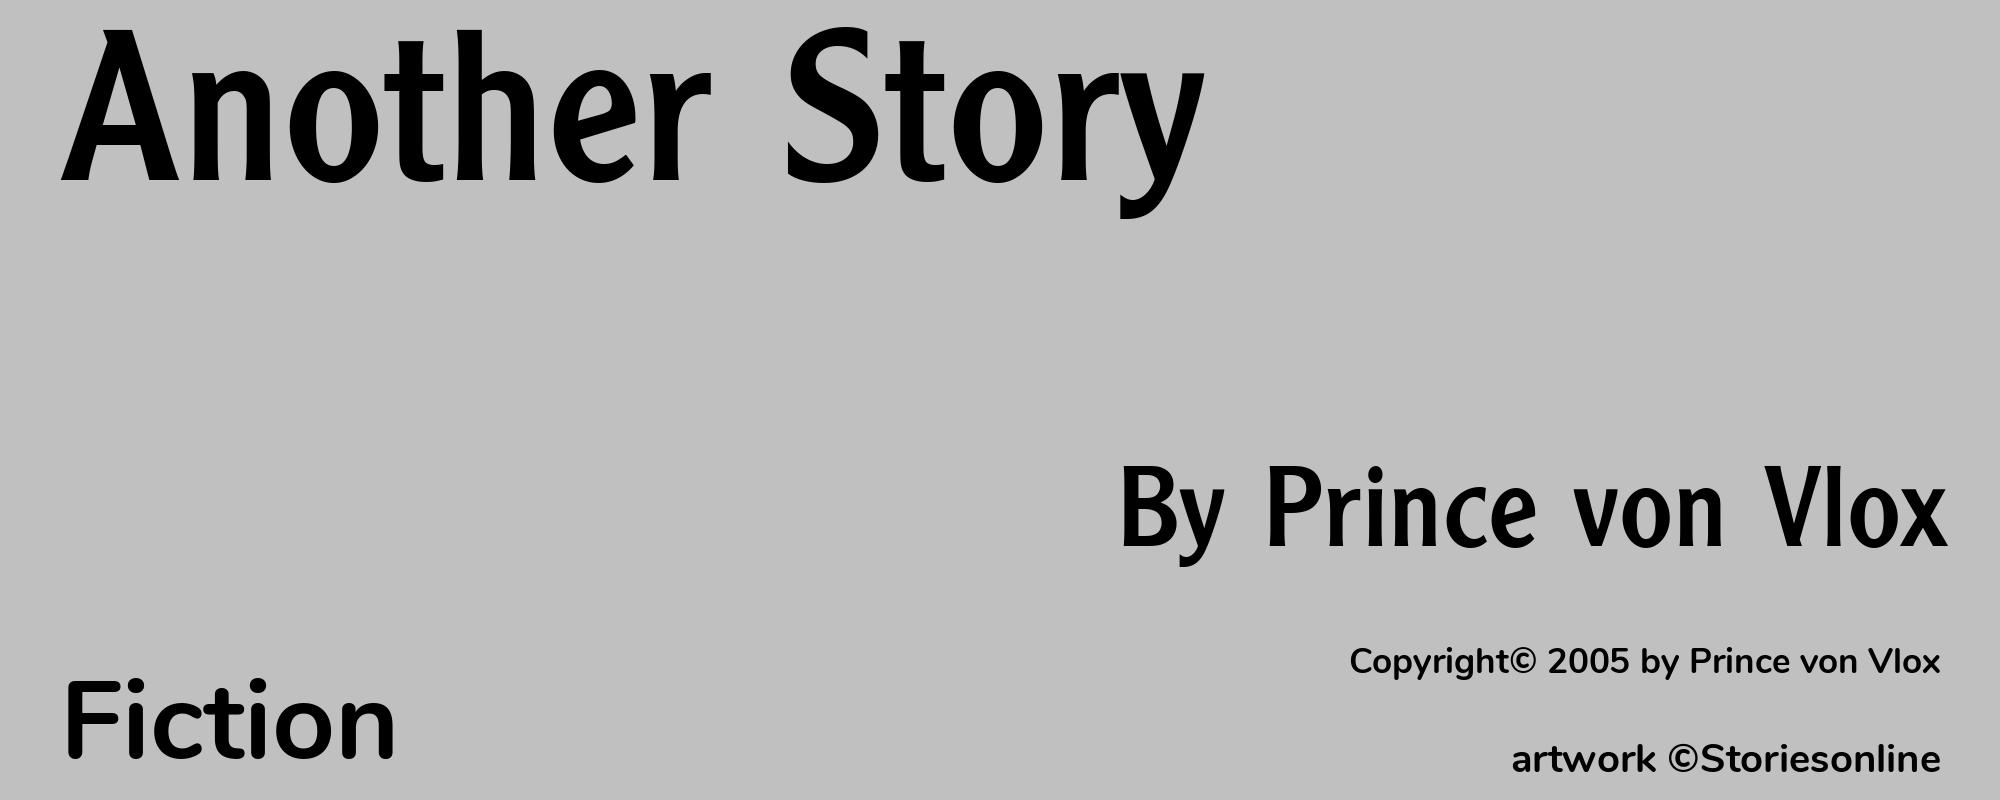 Another Story - Cover